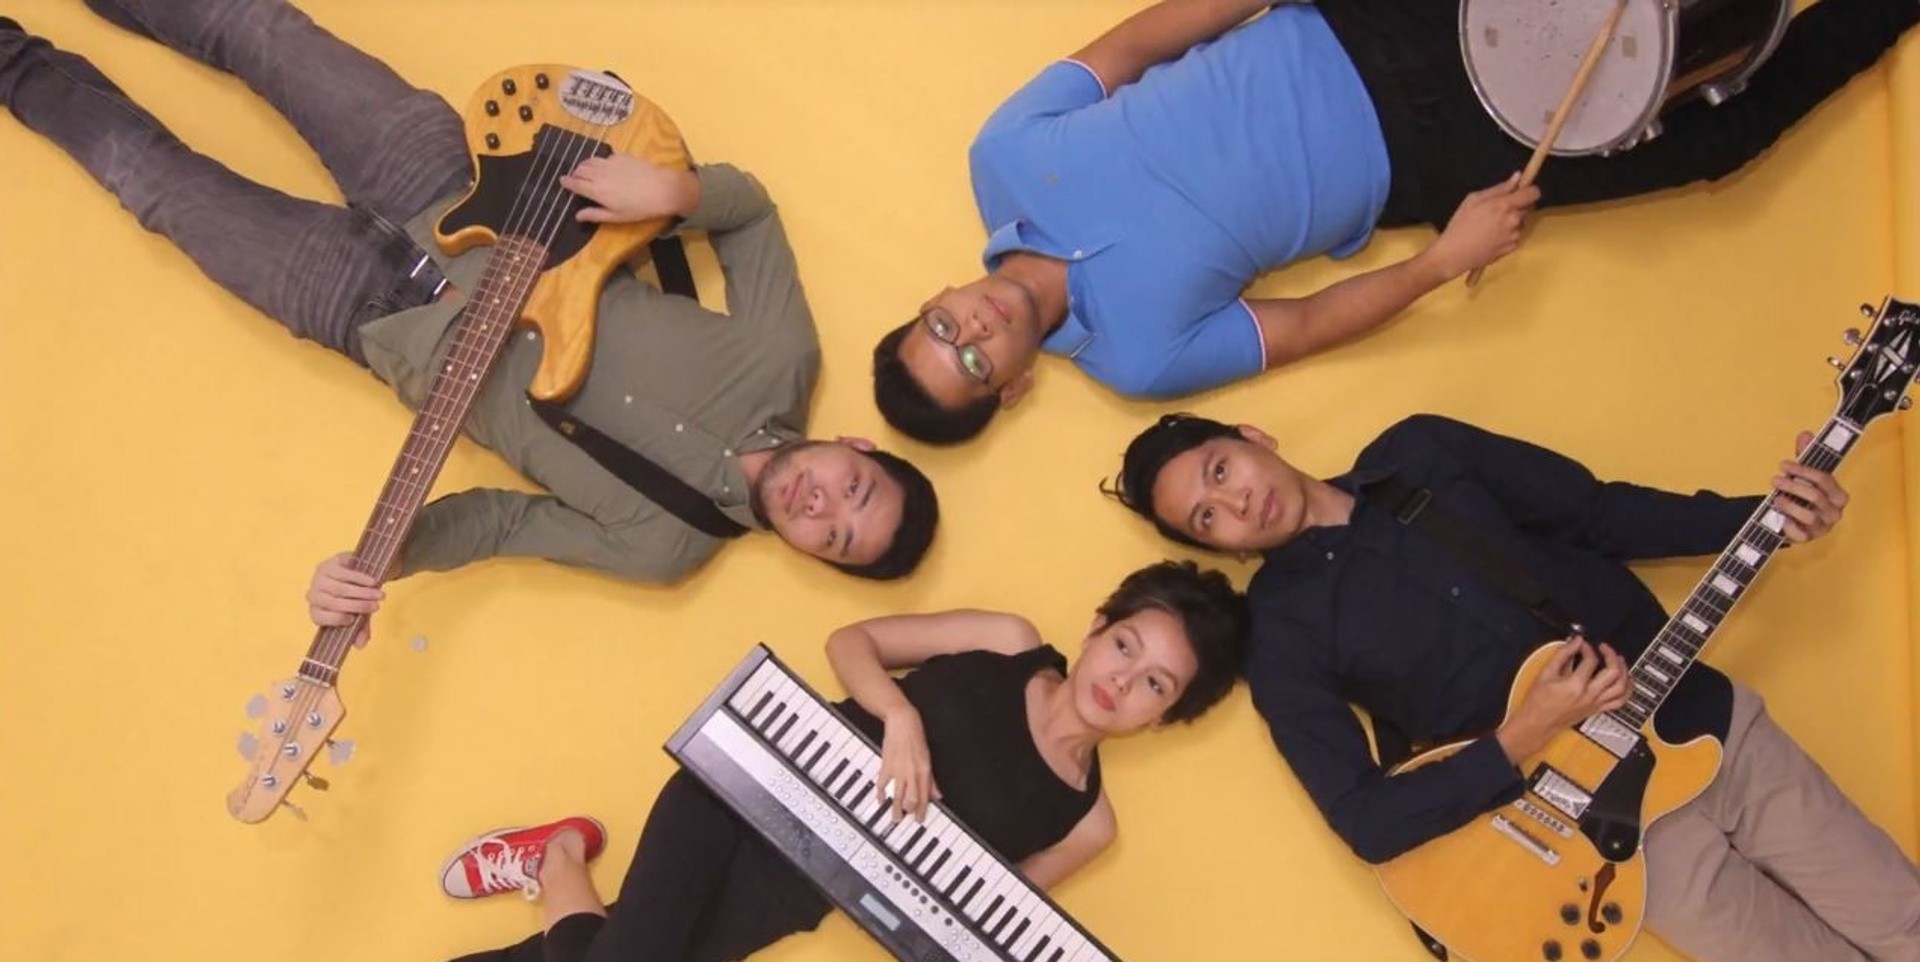 Lenses share playful stop motion 'Ikaw Lang Ang' music video – watch